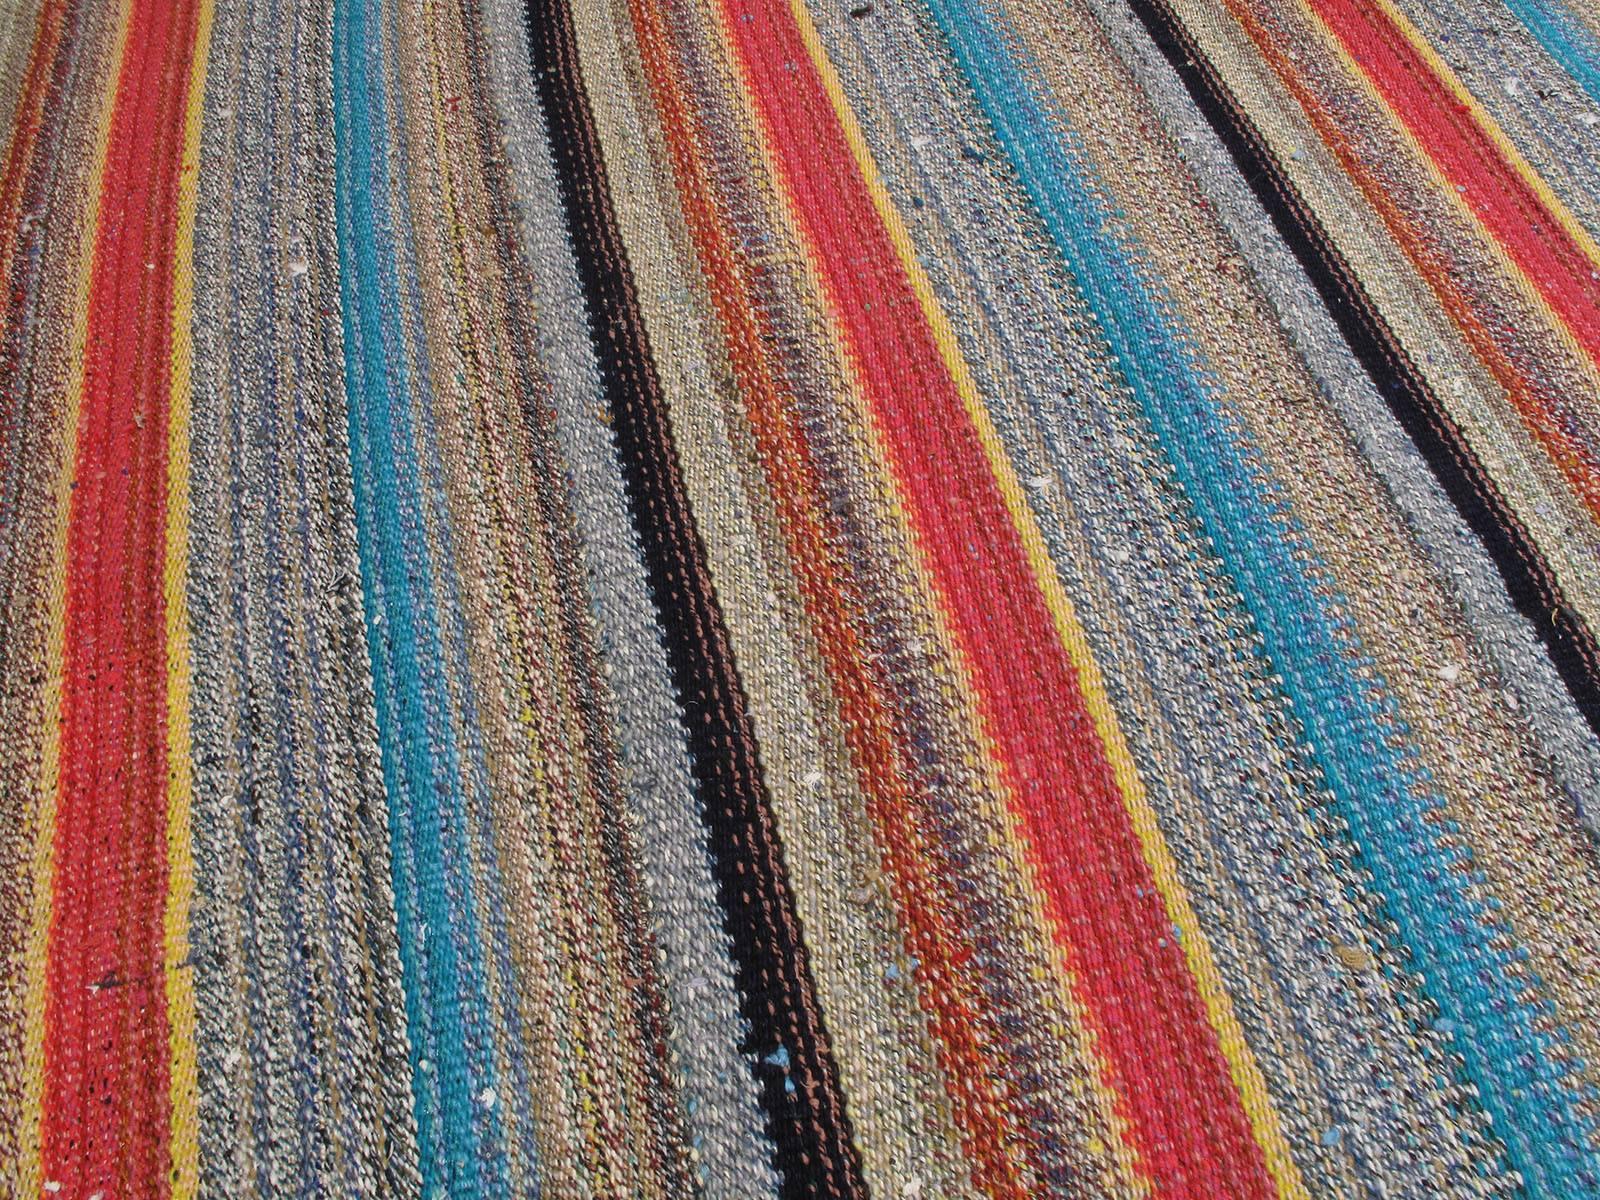 Hand-Woven Large Kilim Rug with Colorful Stripes